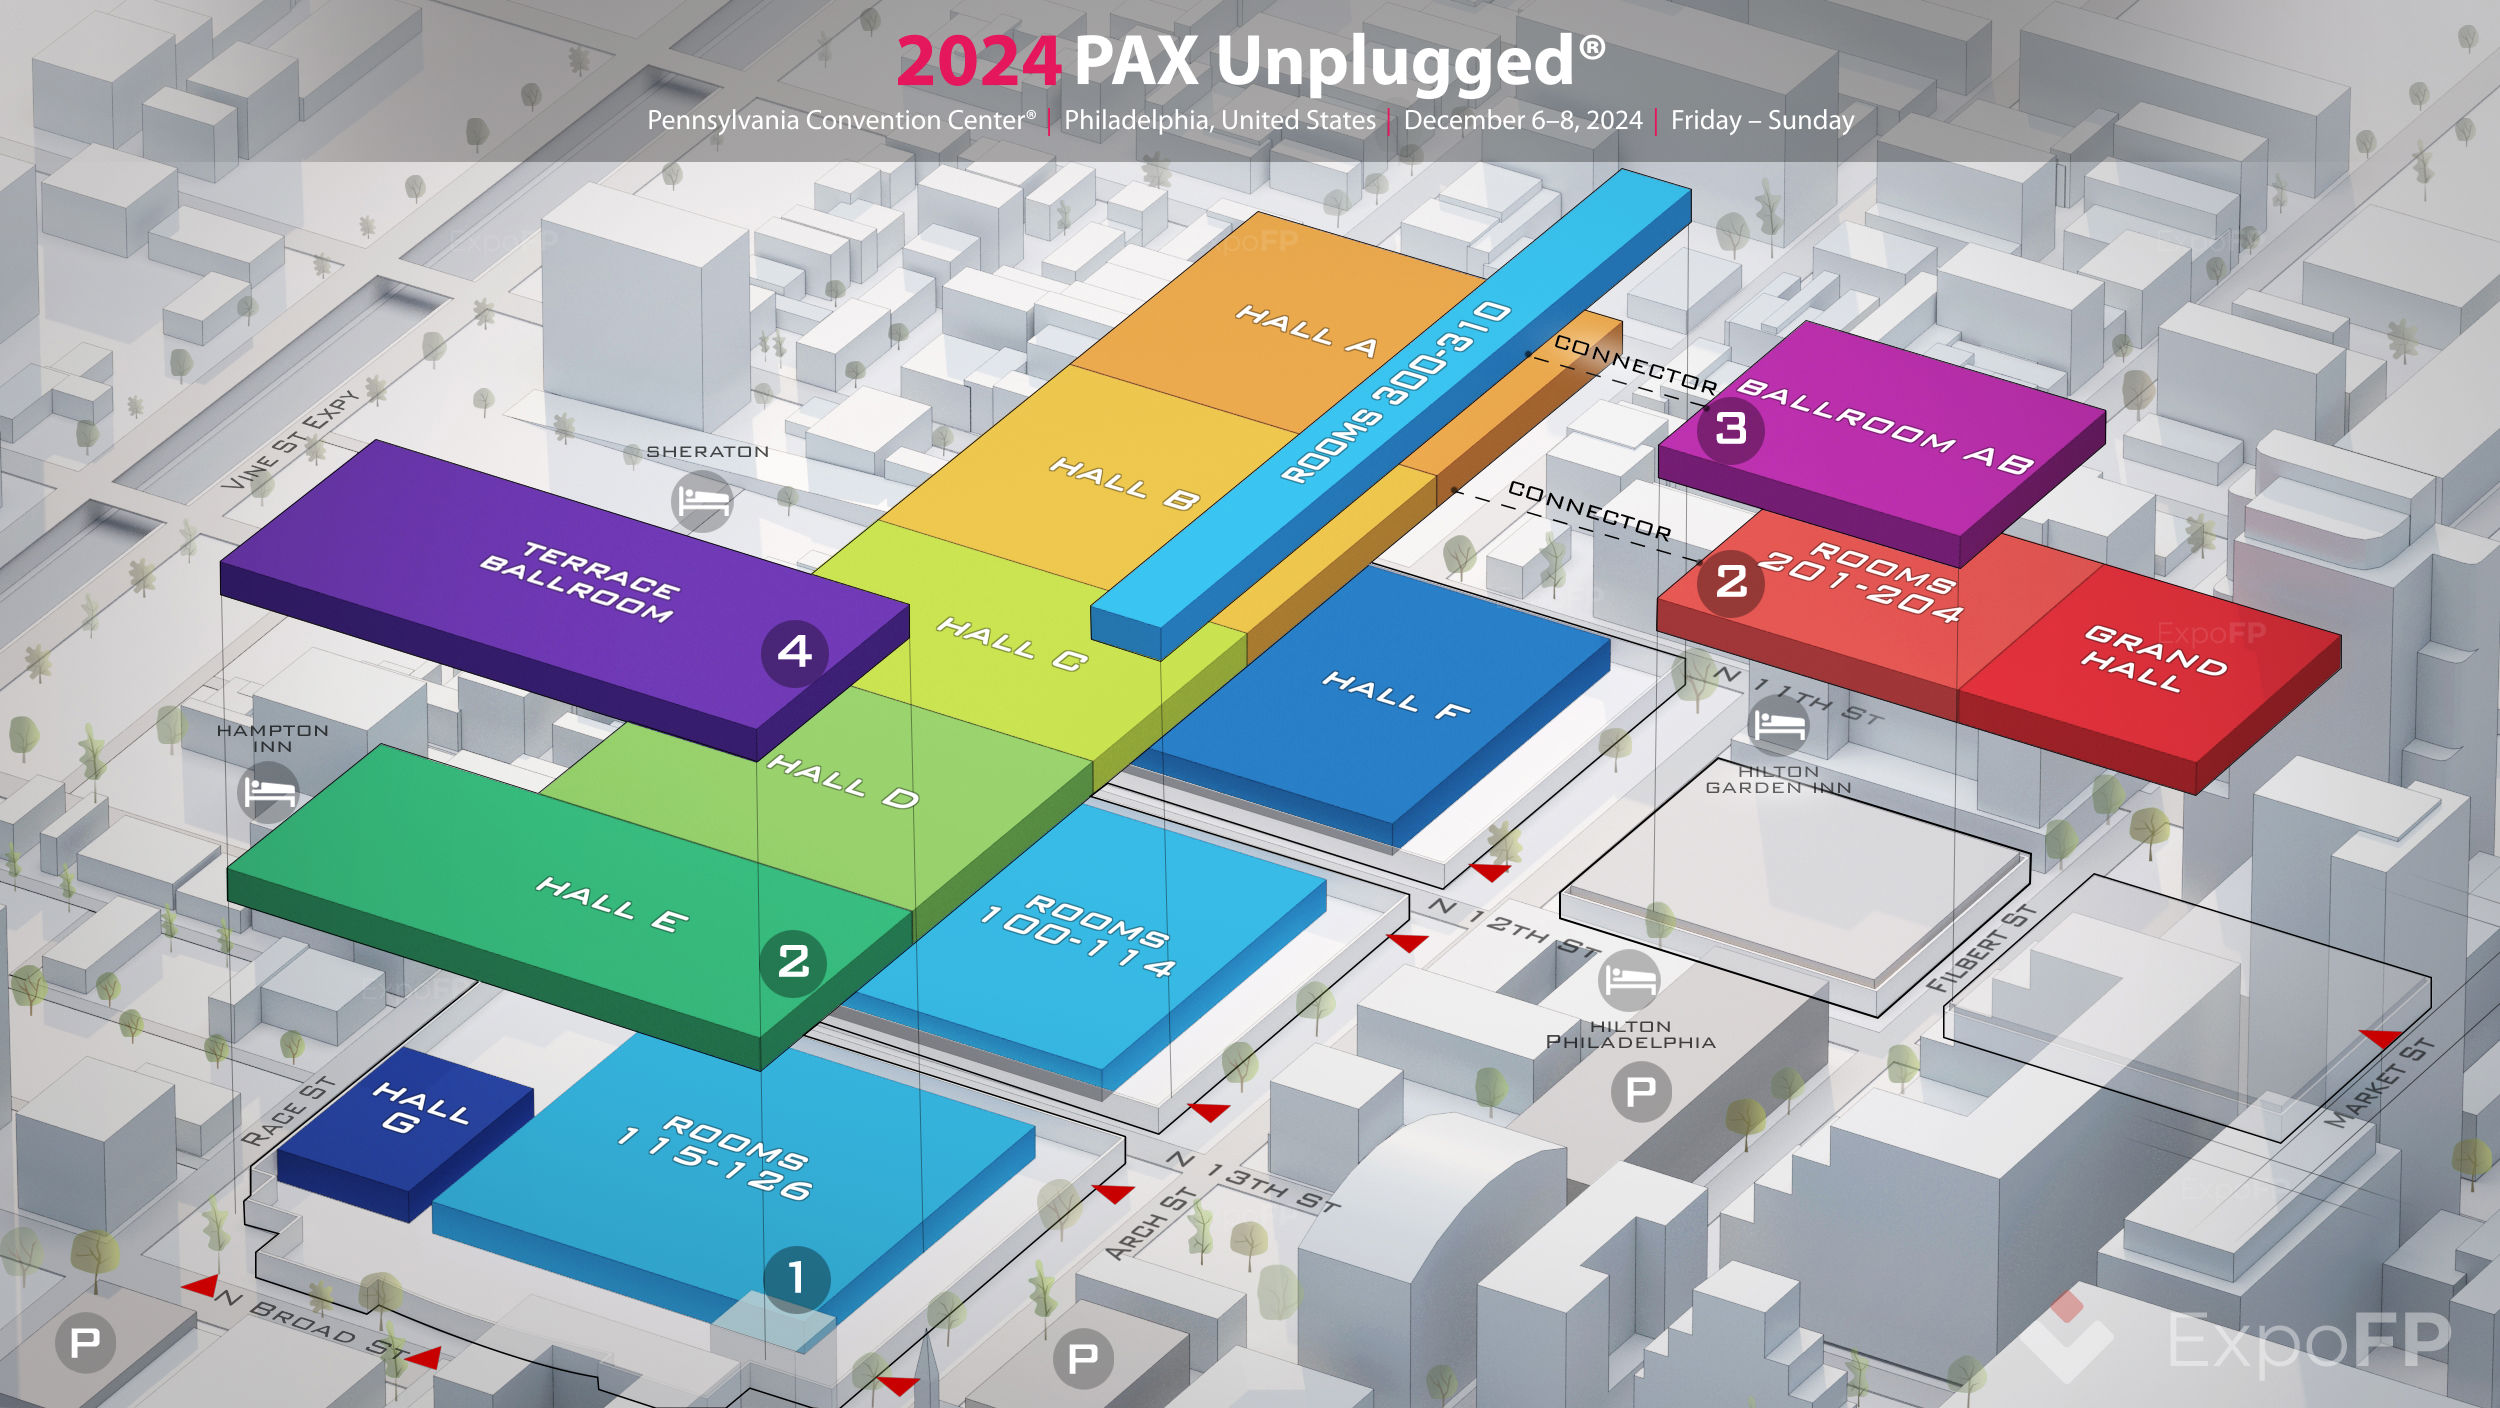 PAX Unplugged 2024 in Pennsylvania Convention Center